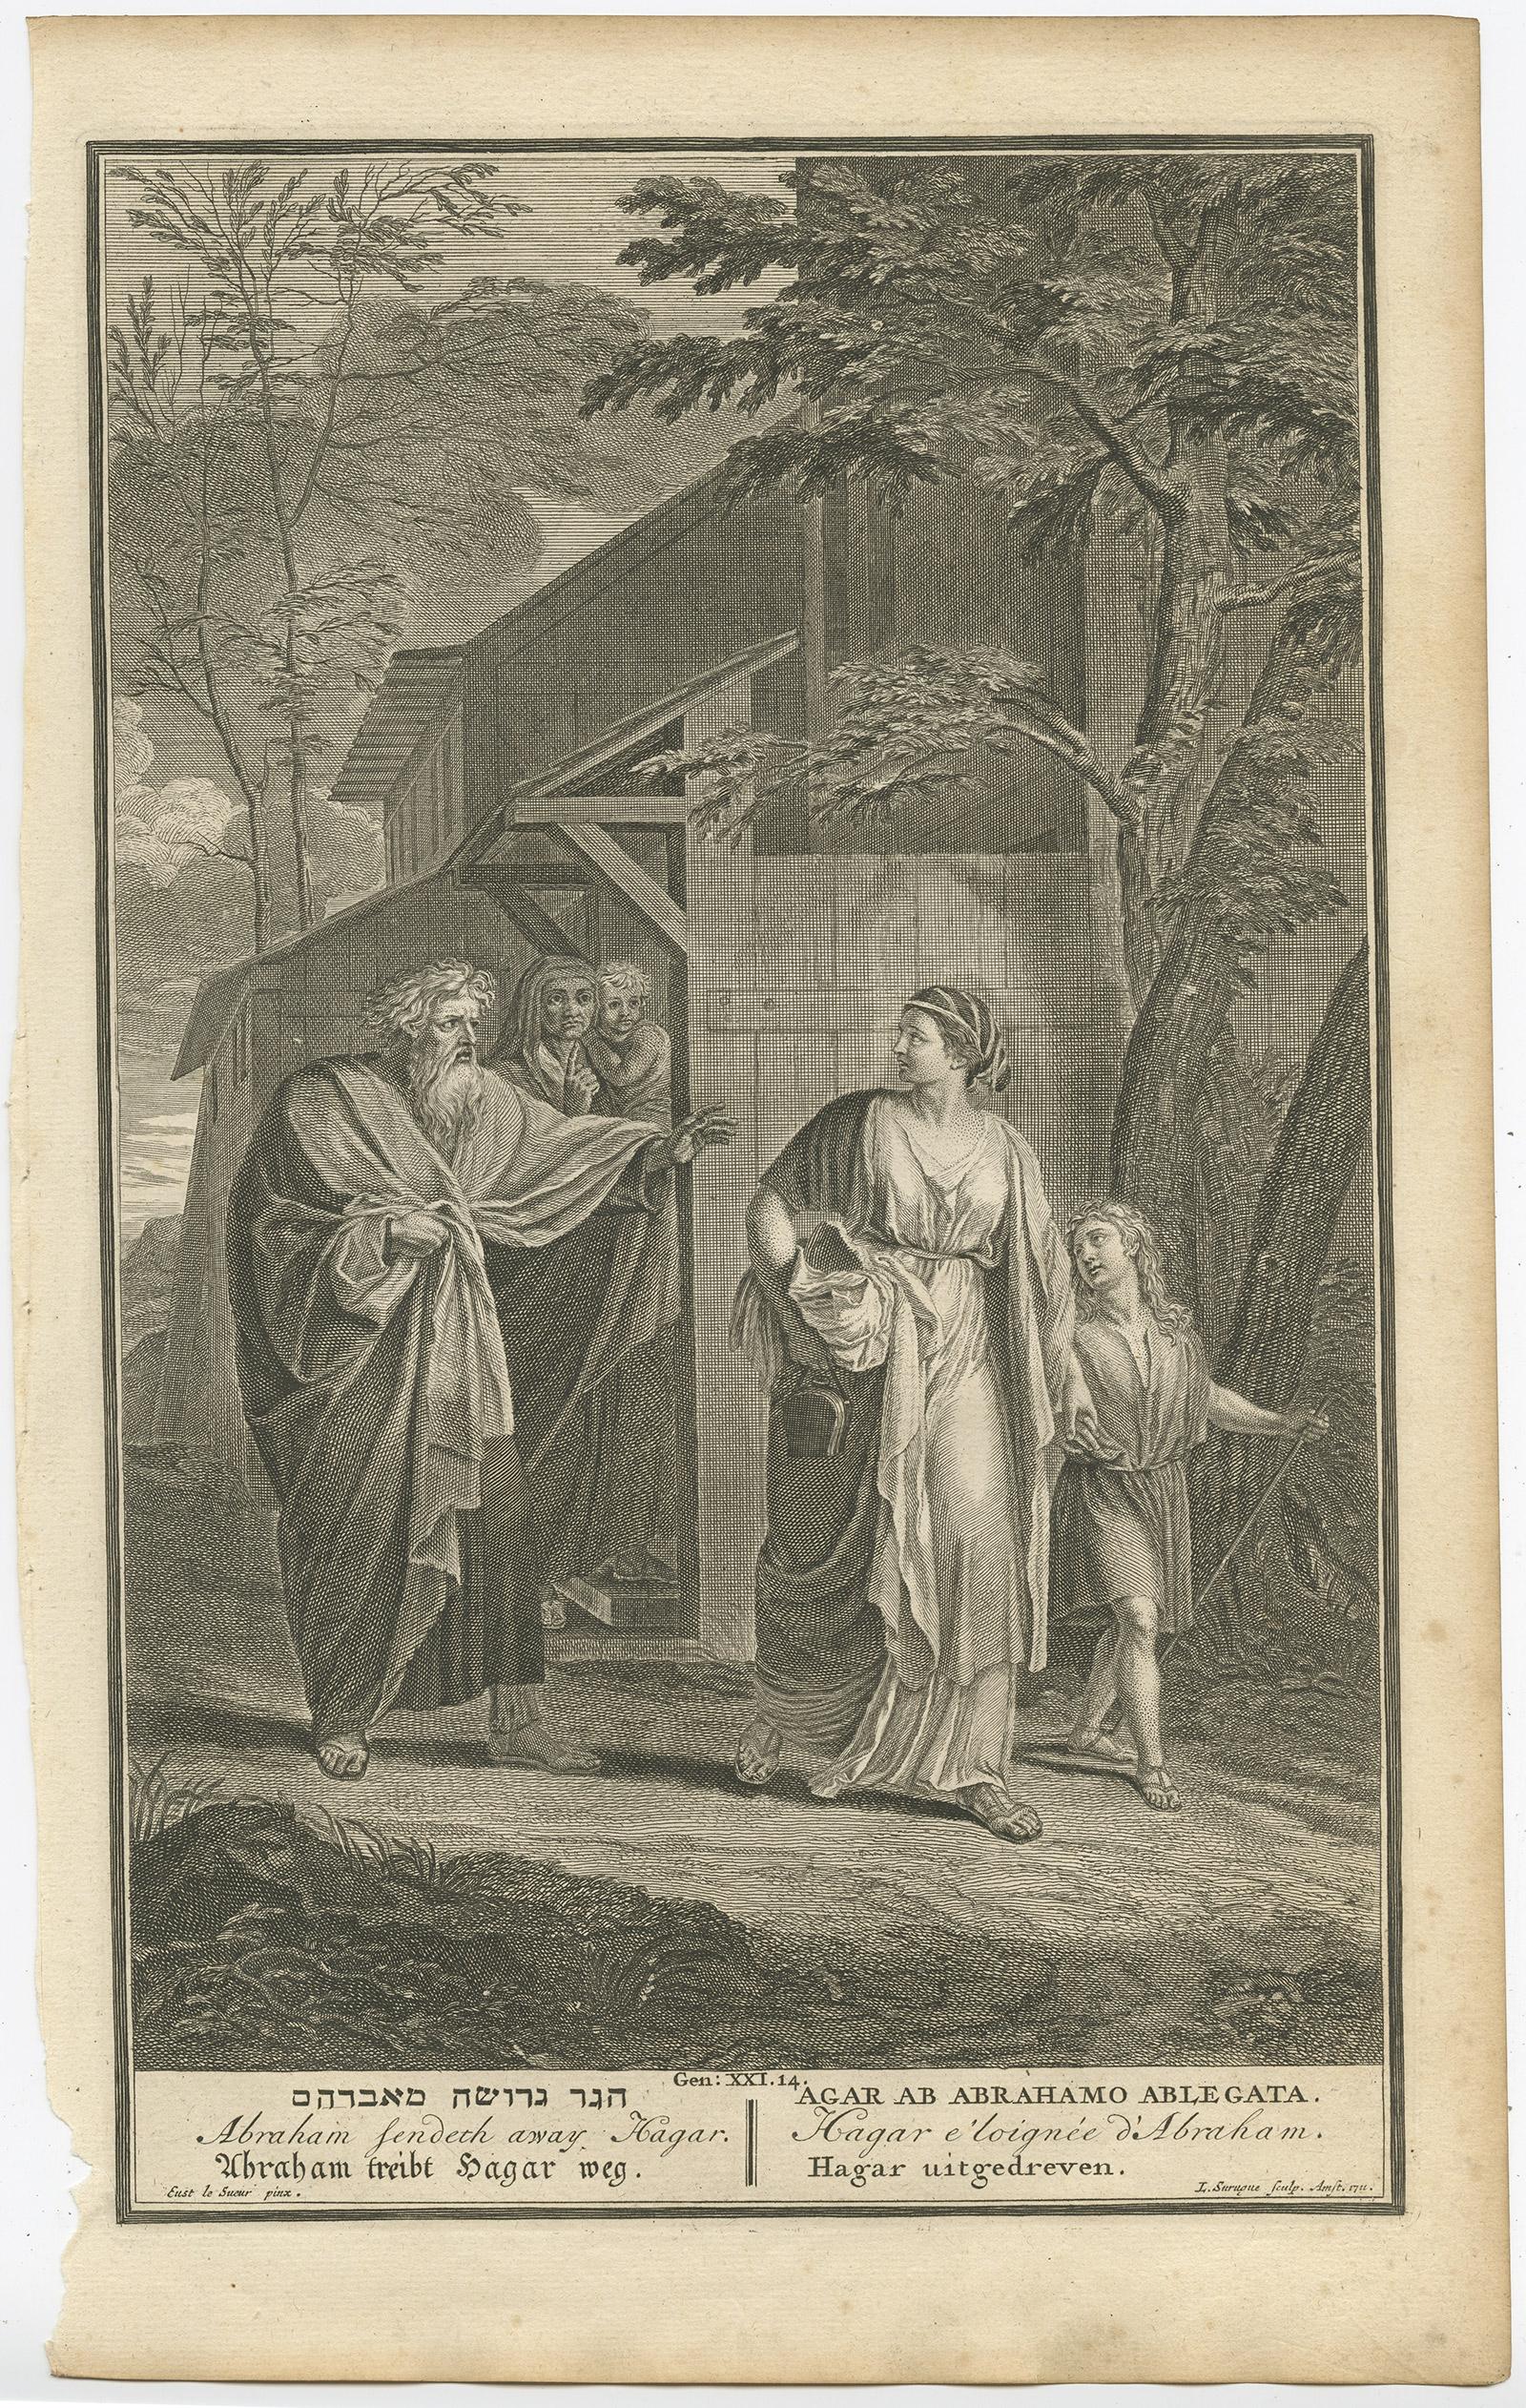 Antique religion print titled 'Abraham sendeth away Hagar'. Abraham Sends Away Hagar; as in Genesis 21:14: 'And Abraham rose up early in the morning, and took bread, and a bottle of water, and gave it unto Hagar, putting it on her shoulder, and the